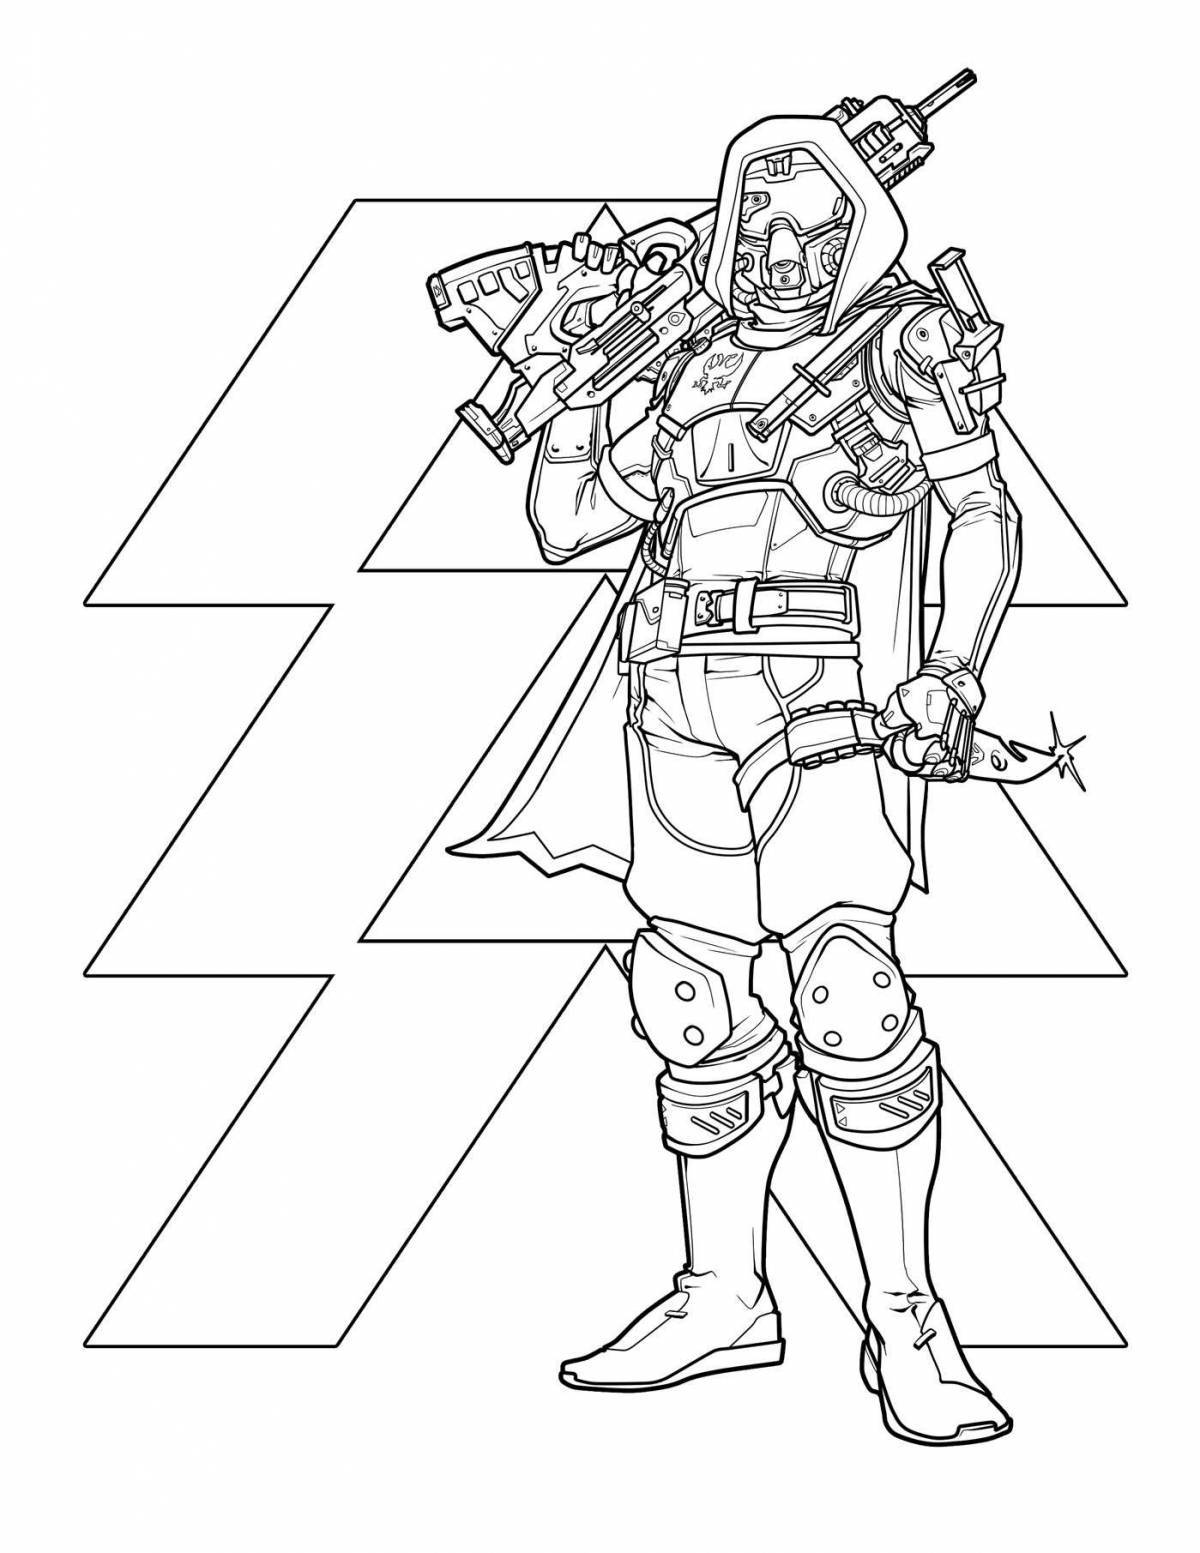 Colorful standoff 2 coloring page